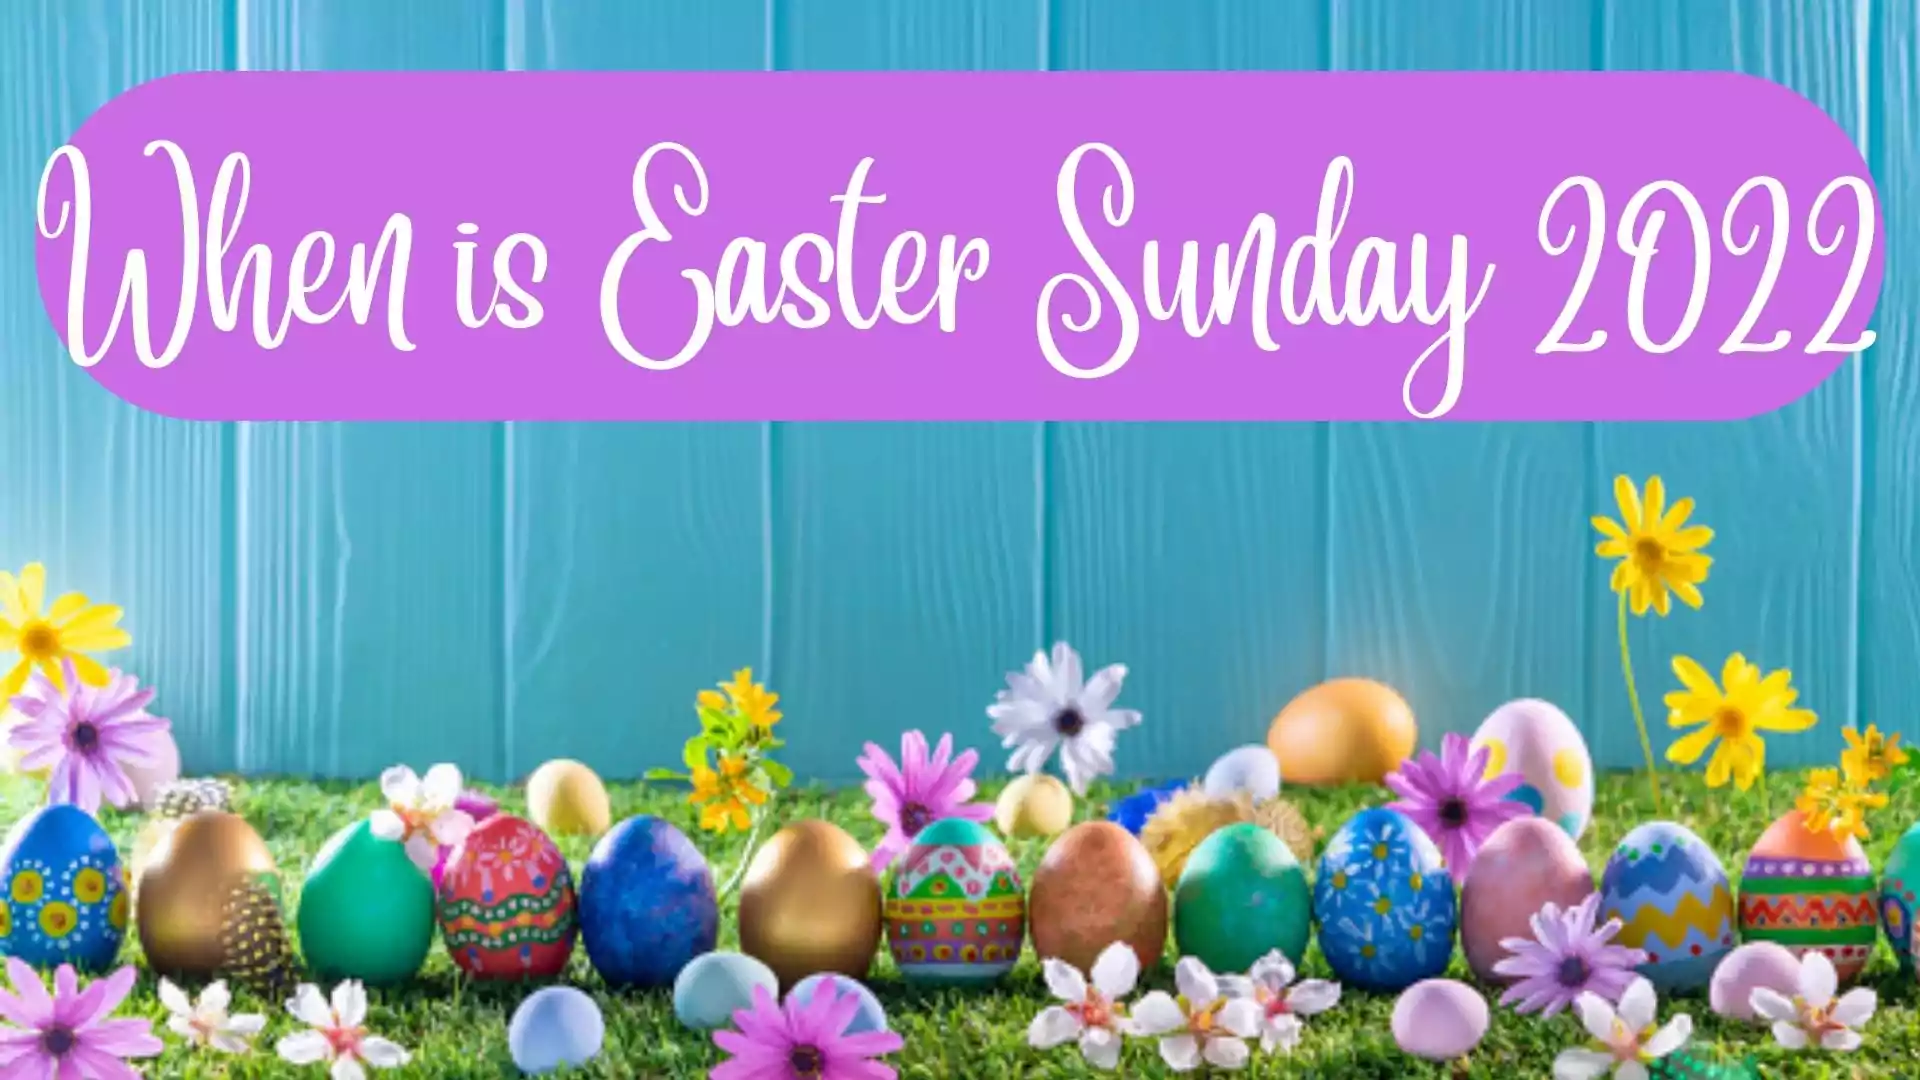 When is Easter Sunday 2022 wallpaper and images